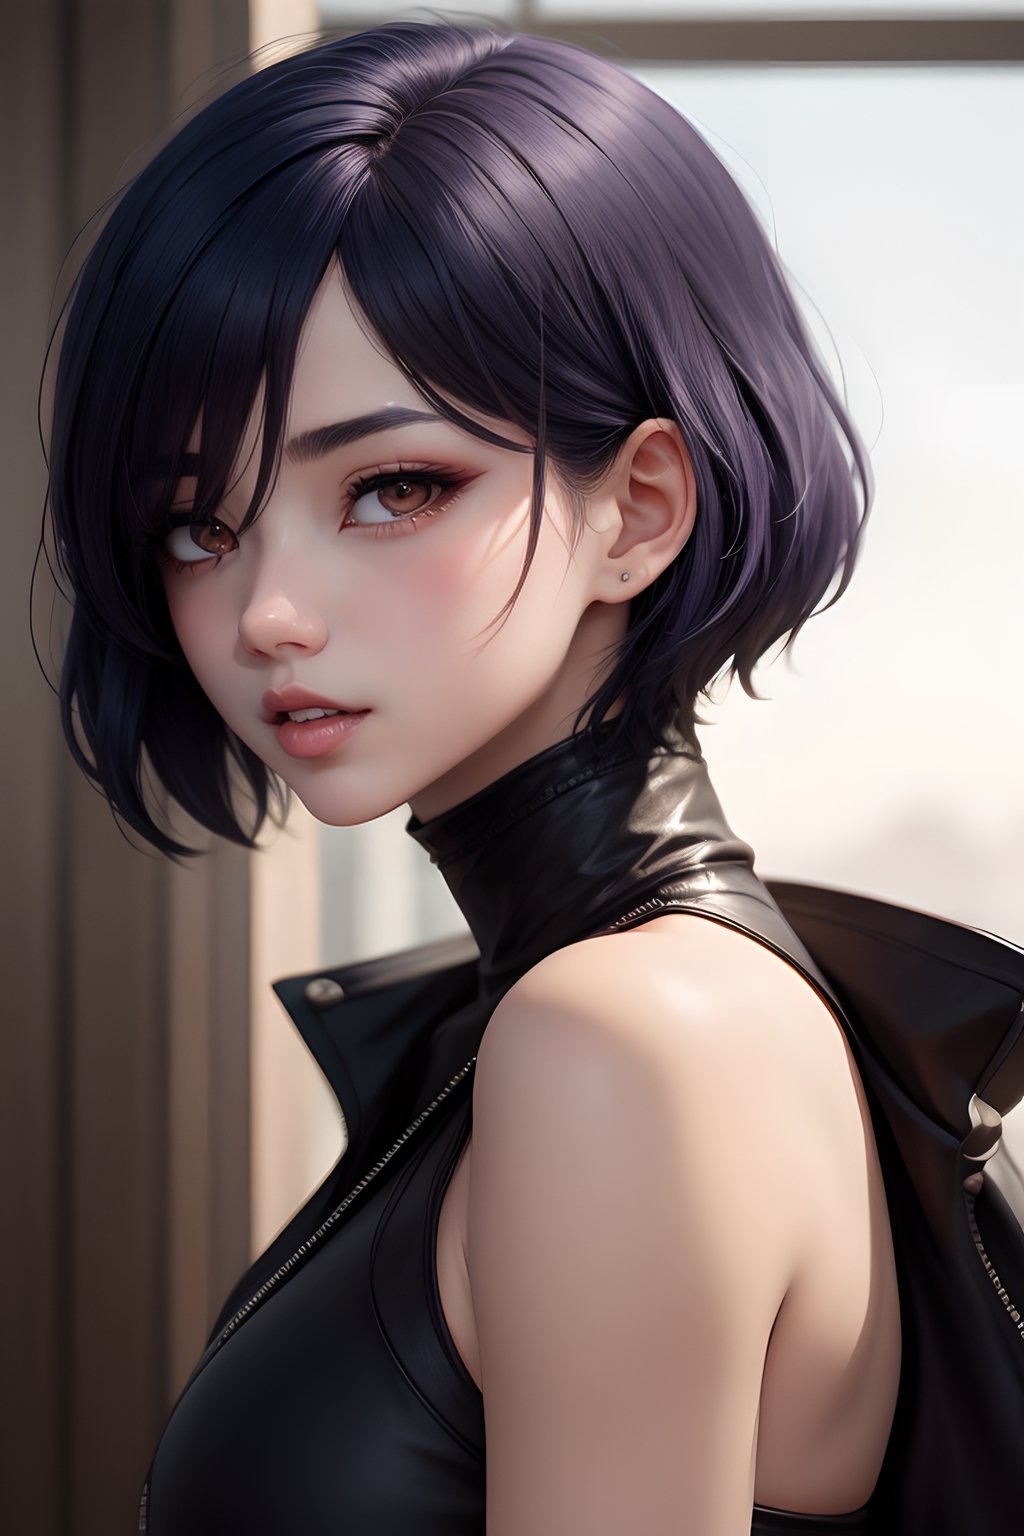 Touka is a slender and attractive teenager with short, dark blue bob hair, along with eyes of the same color, a distinctive feature being her long bangs that cover her right eye. After the Aogiri Arc, her hair became longer and now reaches the back of her neck.,tsurime,pastelbg,Anime ,ohwx woman,r4w photo,Extremely Realistic,facial cum